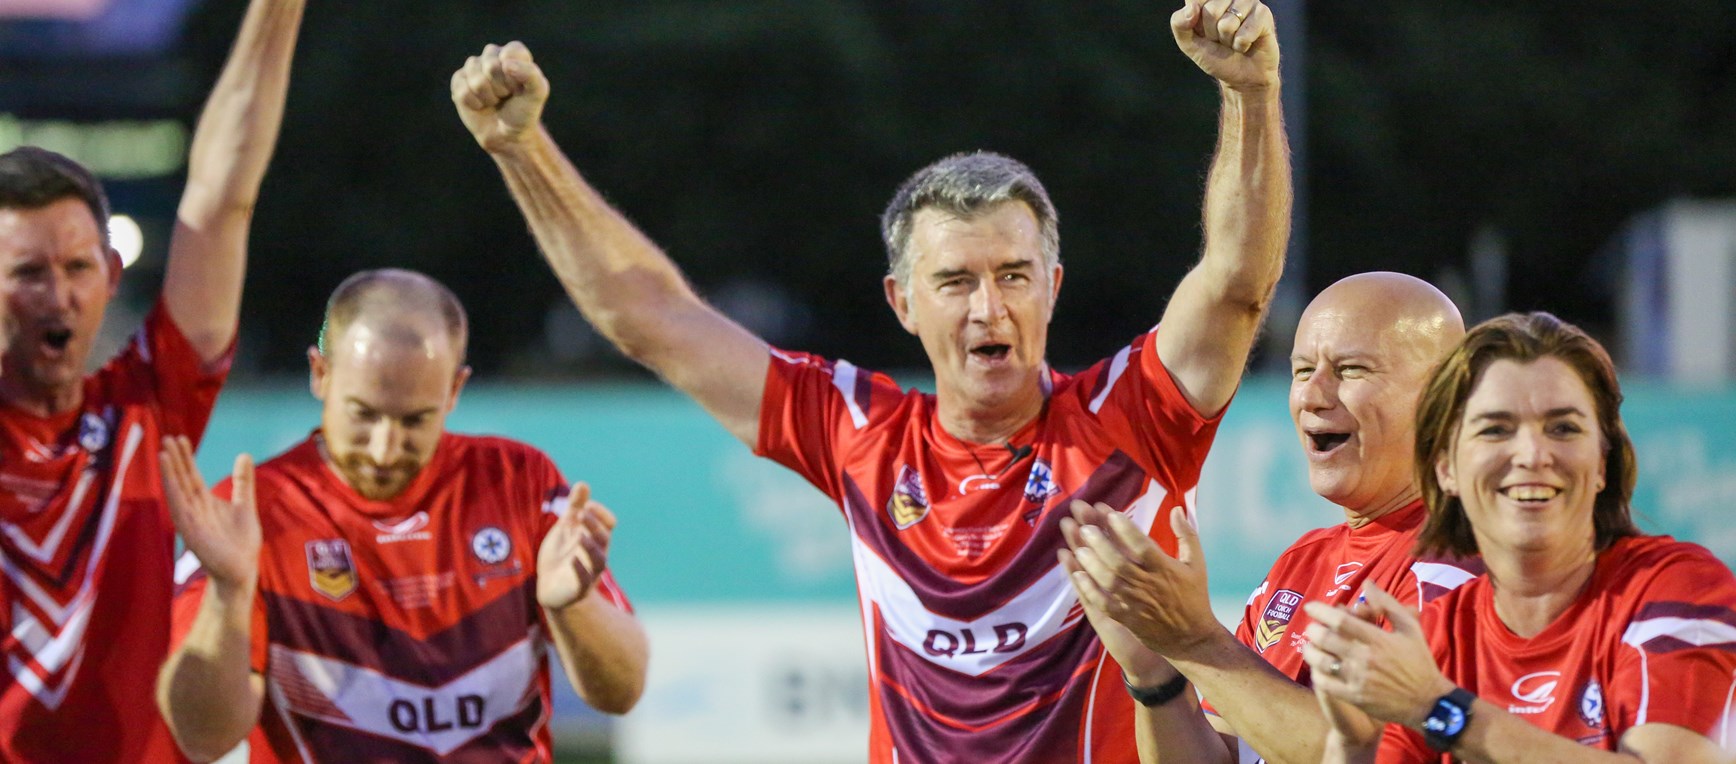 In pictures: City win Parliamentary touch clash